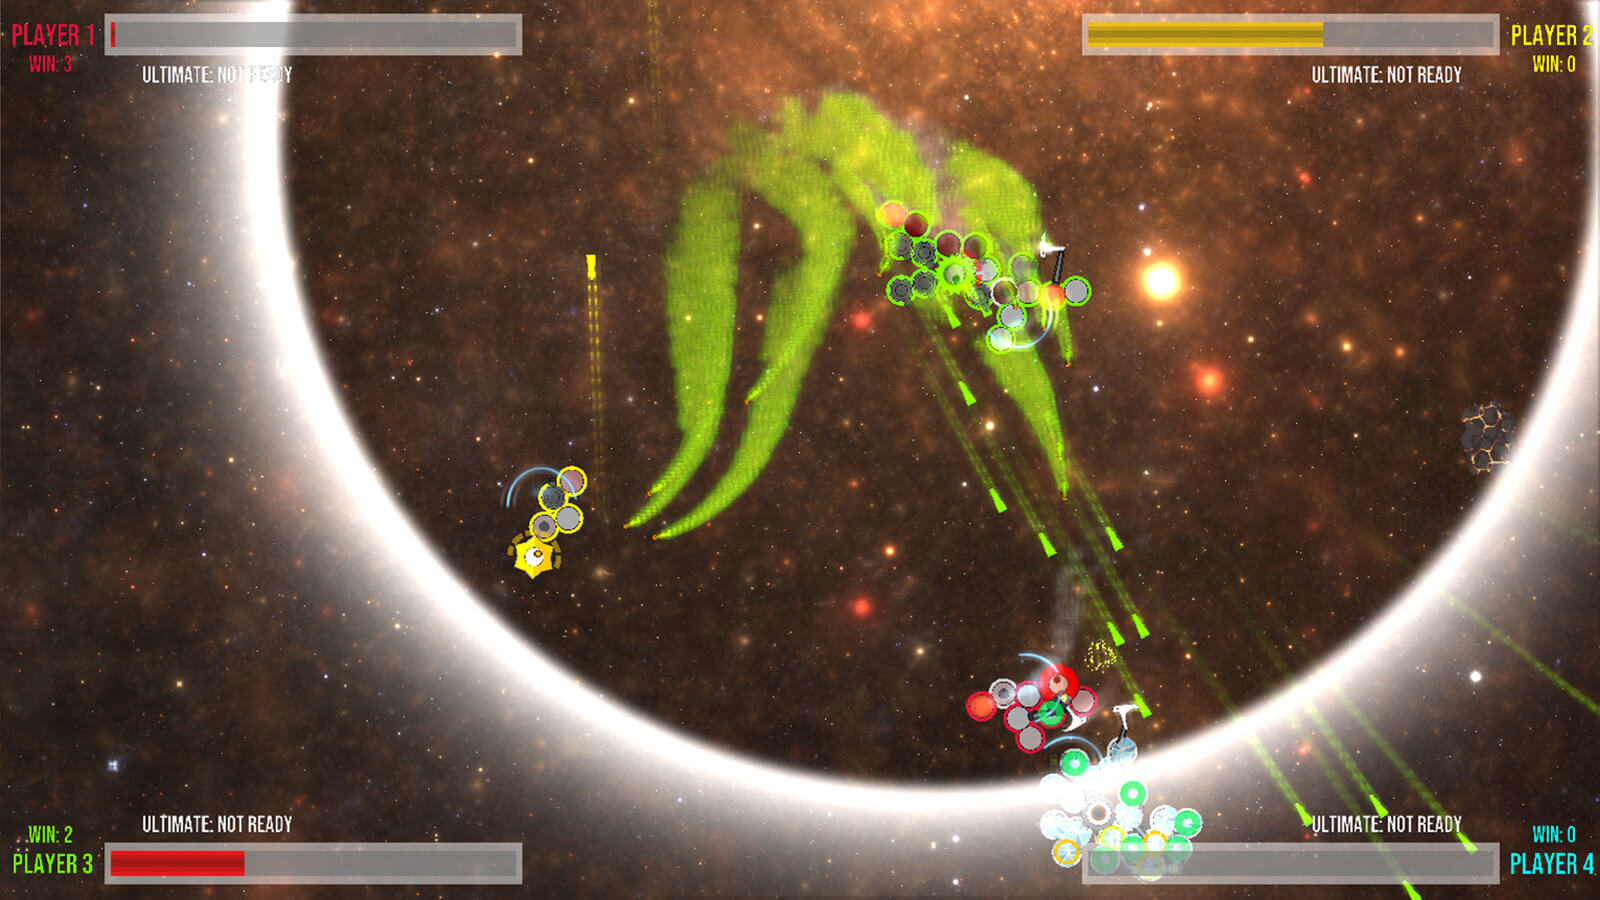 A group of "I" creatures battle each other in space with noxious green spray guns. 